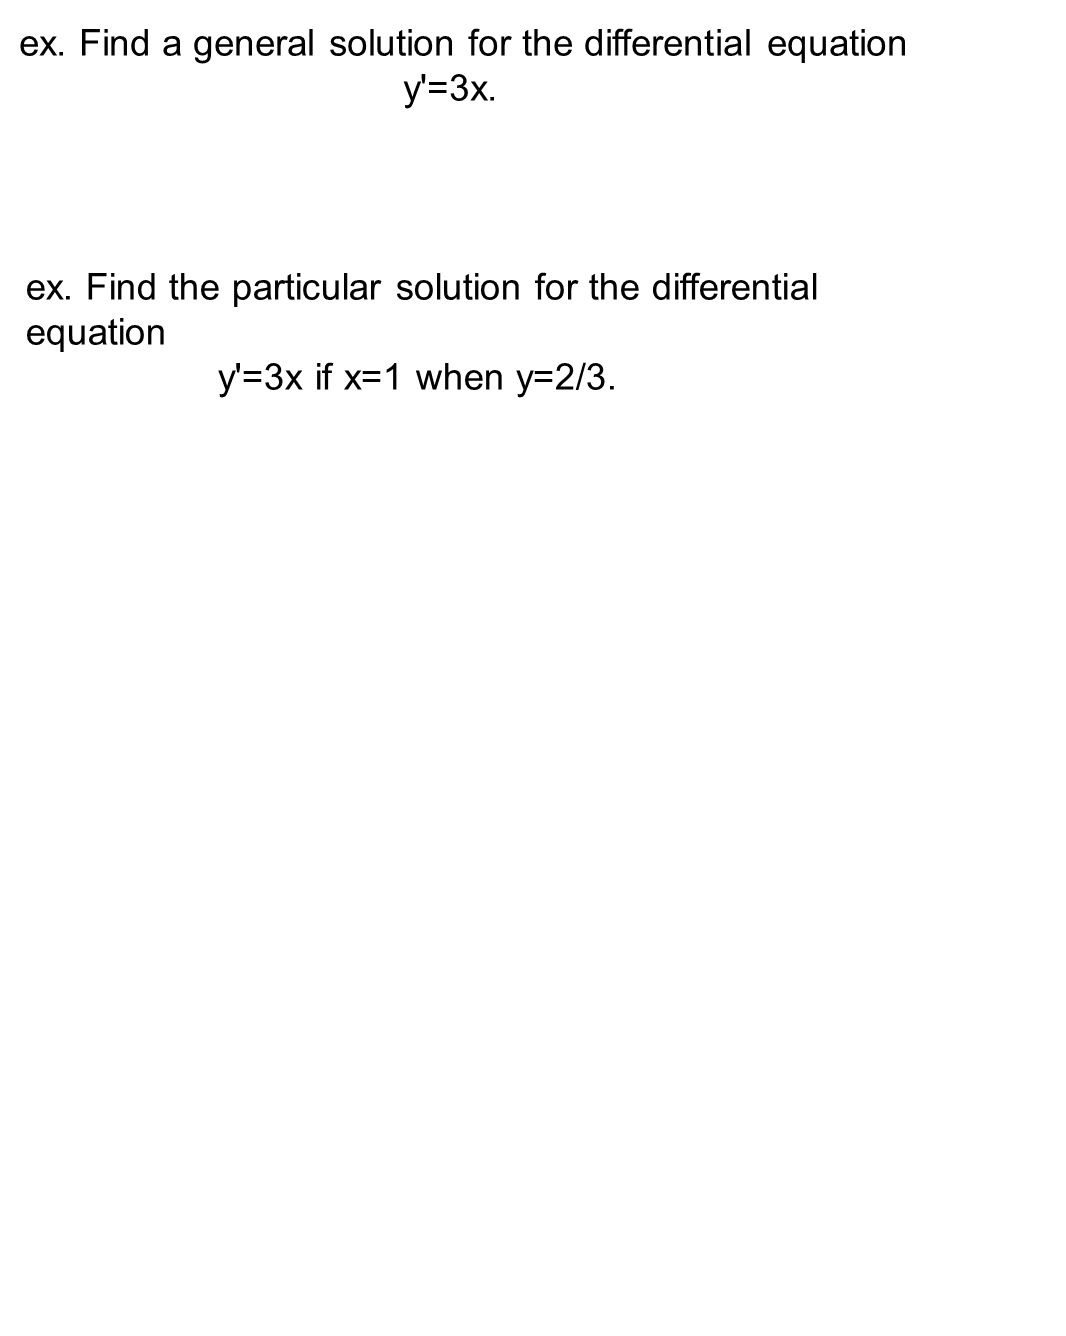 ex. Find a general solution for the differential equation y =3x.